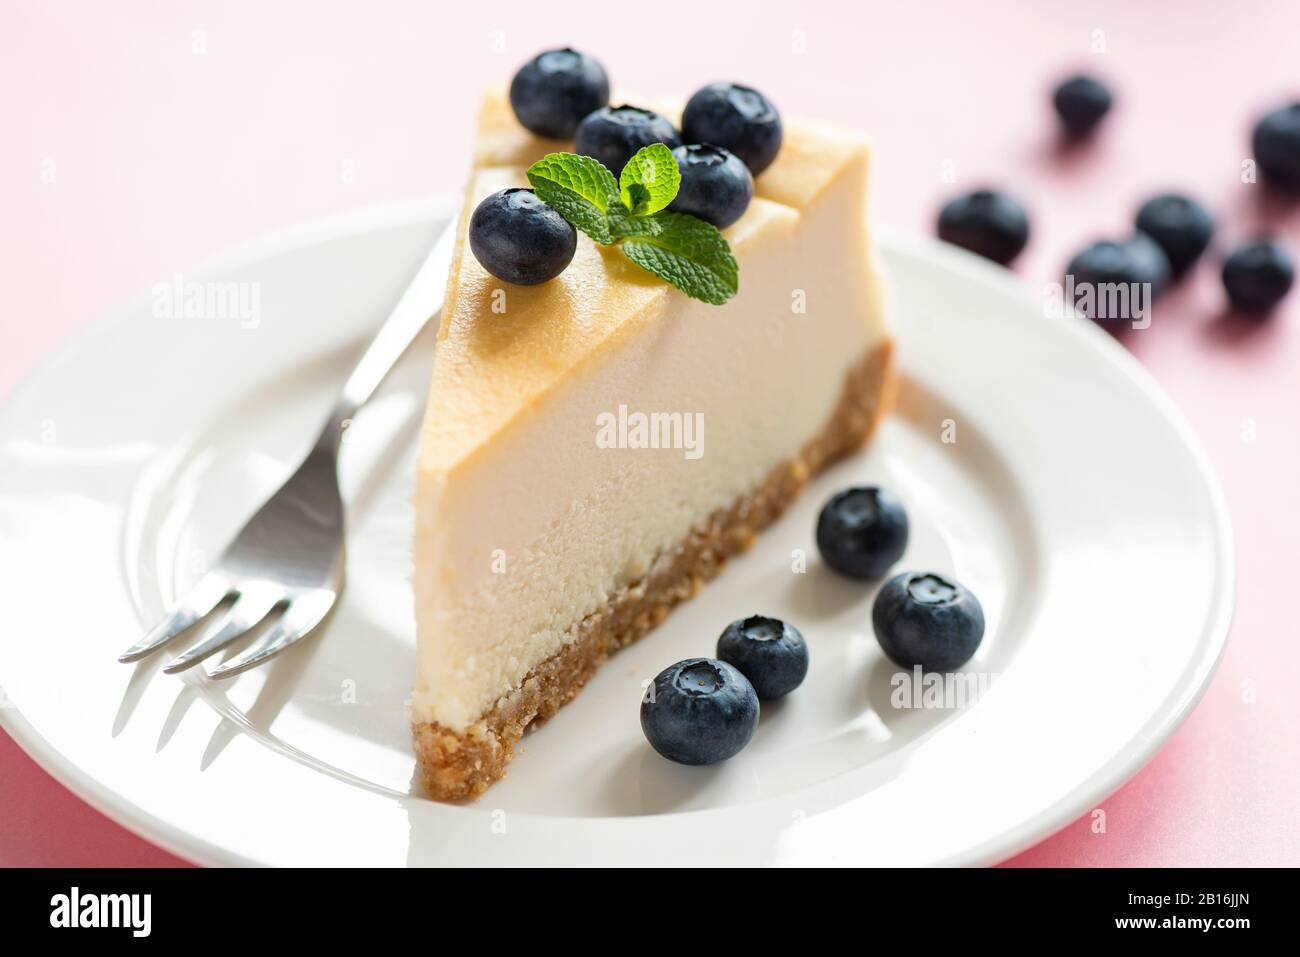 Classical Cheesecake Slice Served With Fresh Blueberries And Mint Leaf On White Plate, Pink Background. Tasty Sweet Dessert Food. Creamy Cake Stock Photo